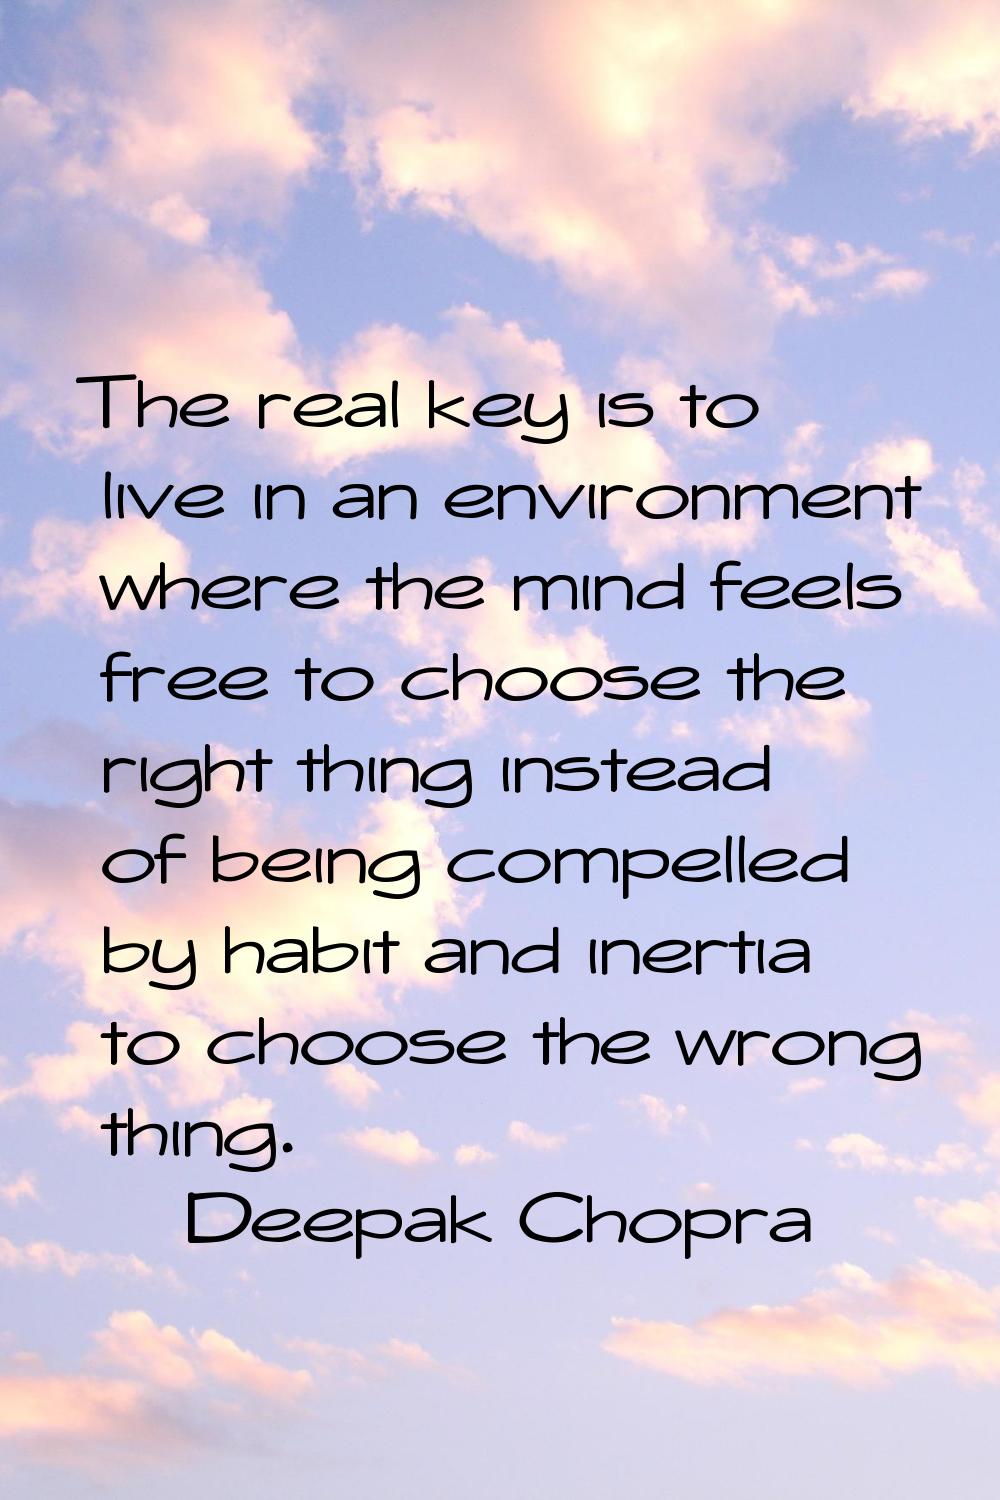 The real key is to live in an environment where the mind feels free to choose the right thing inste